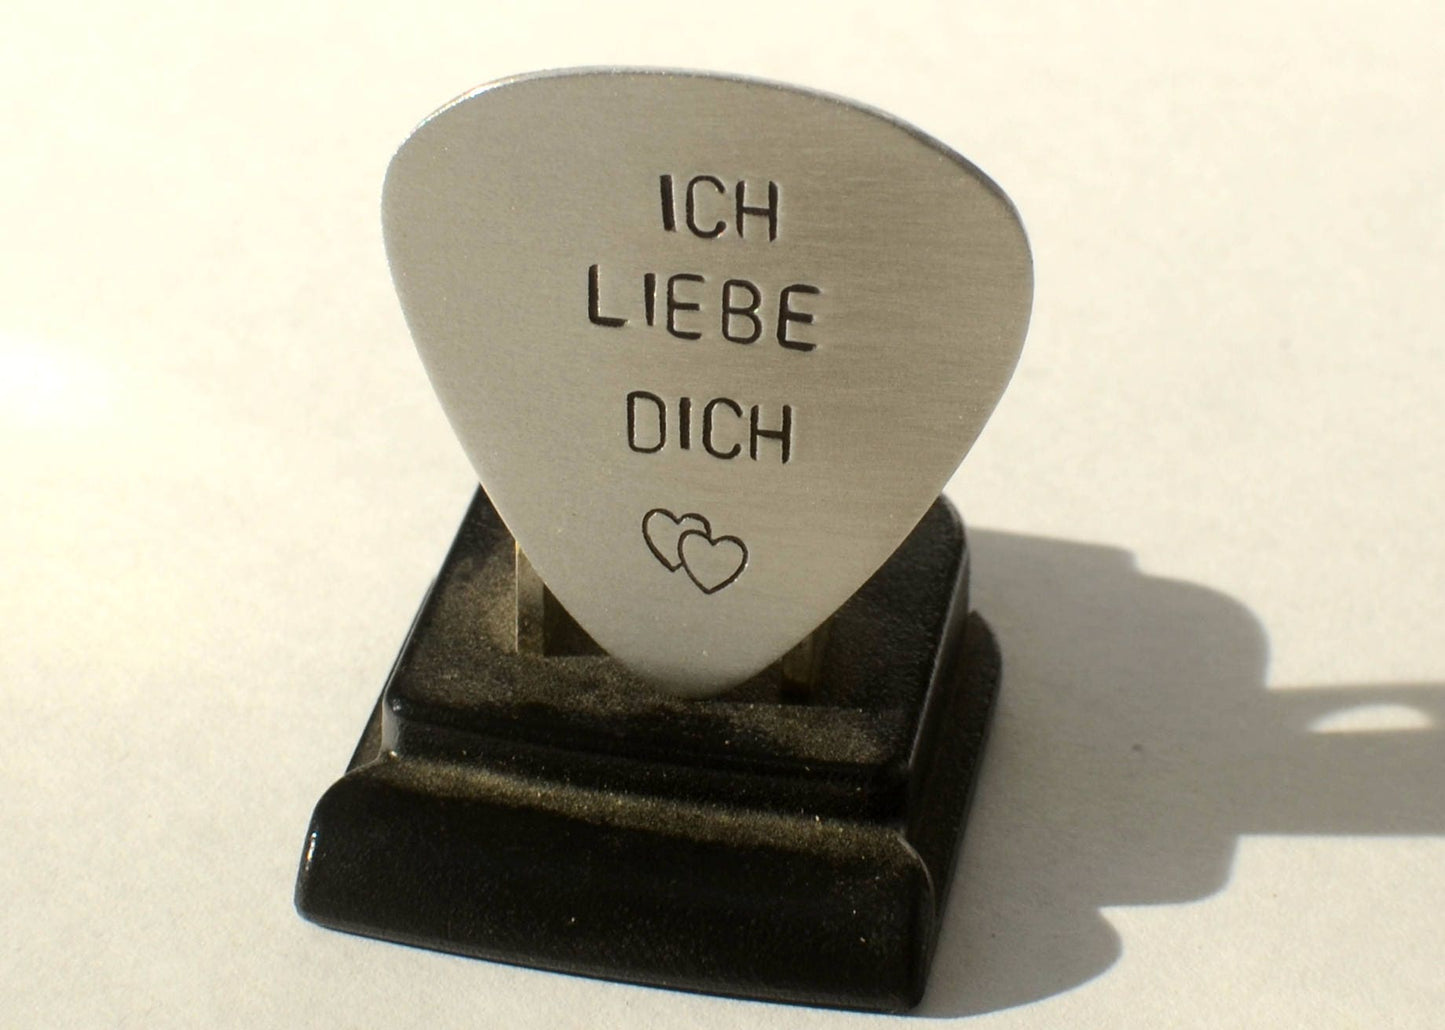 Sterling silver guitar pick with Ich liebe dich and a heart